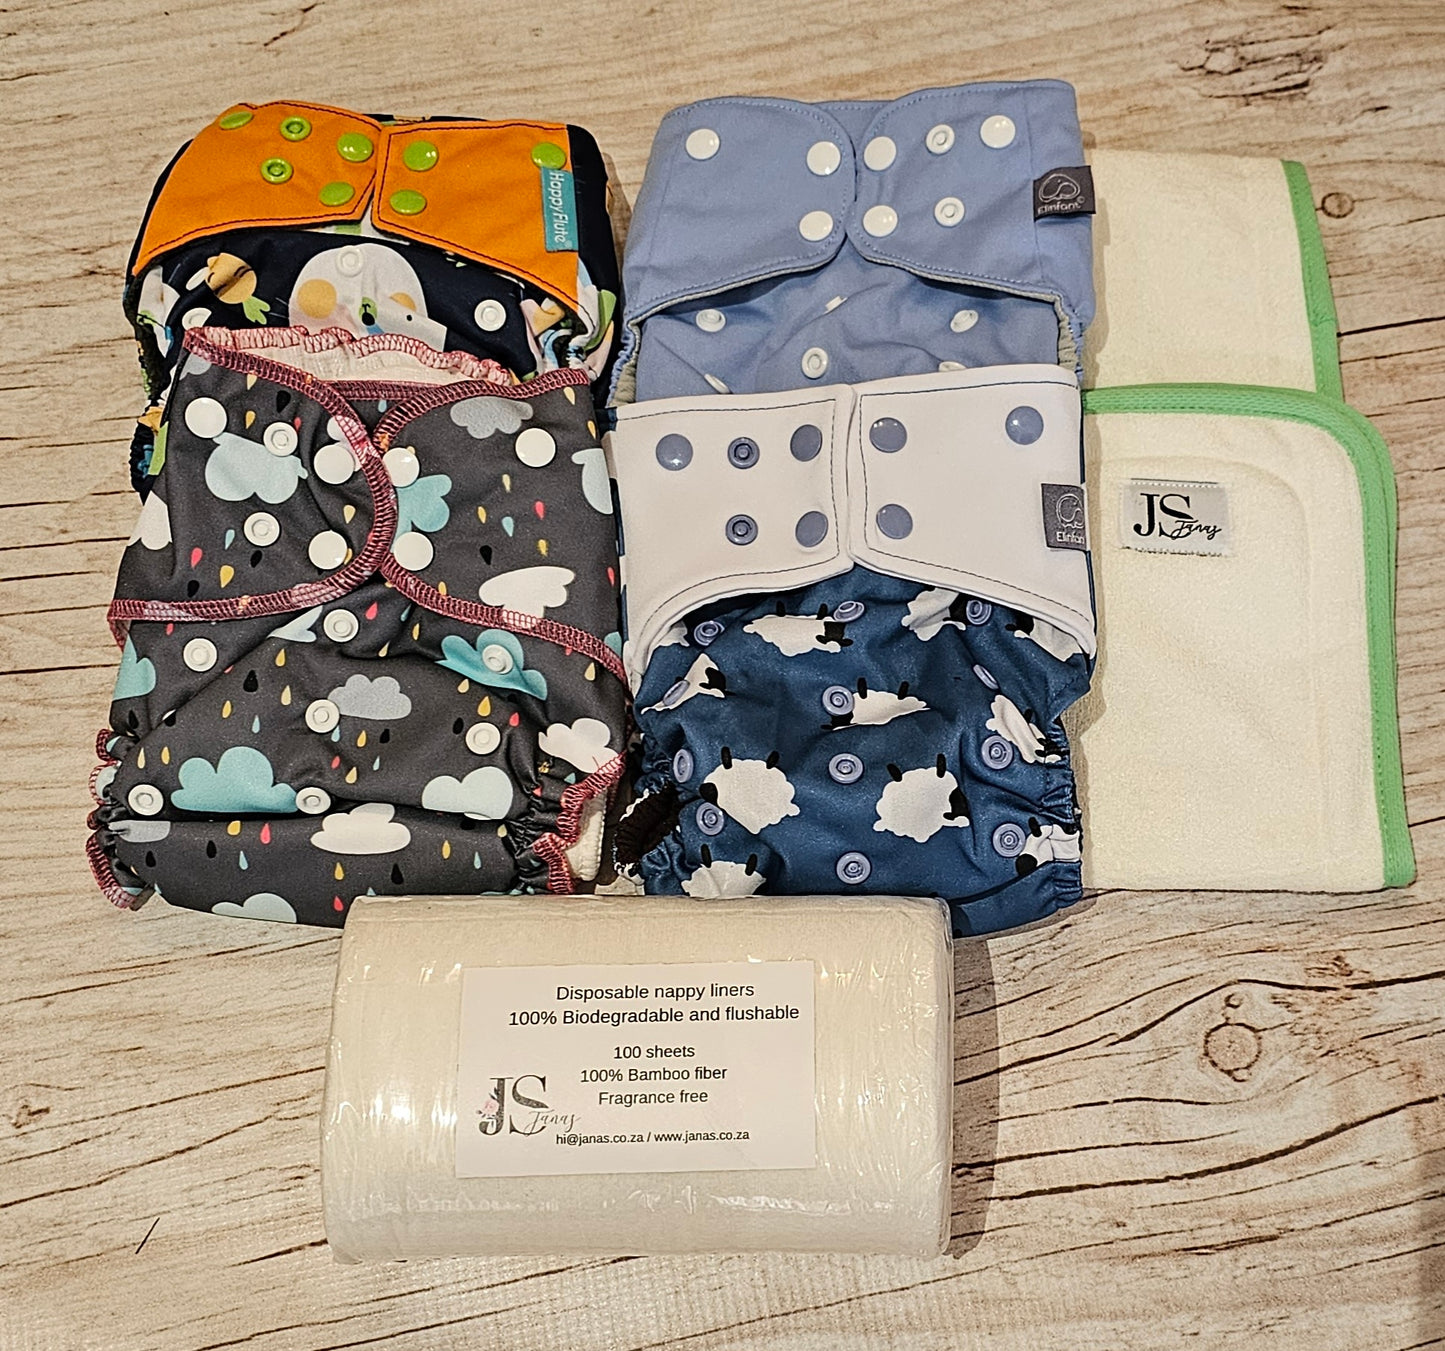 Cloth nappy test pack diapers option 2